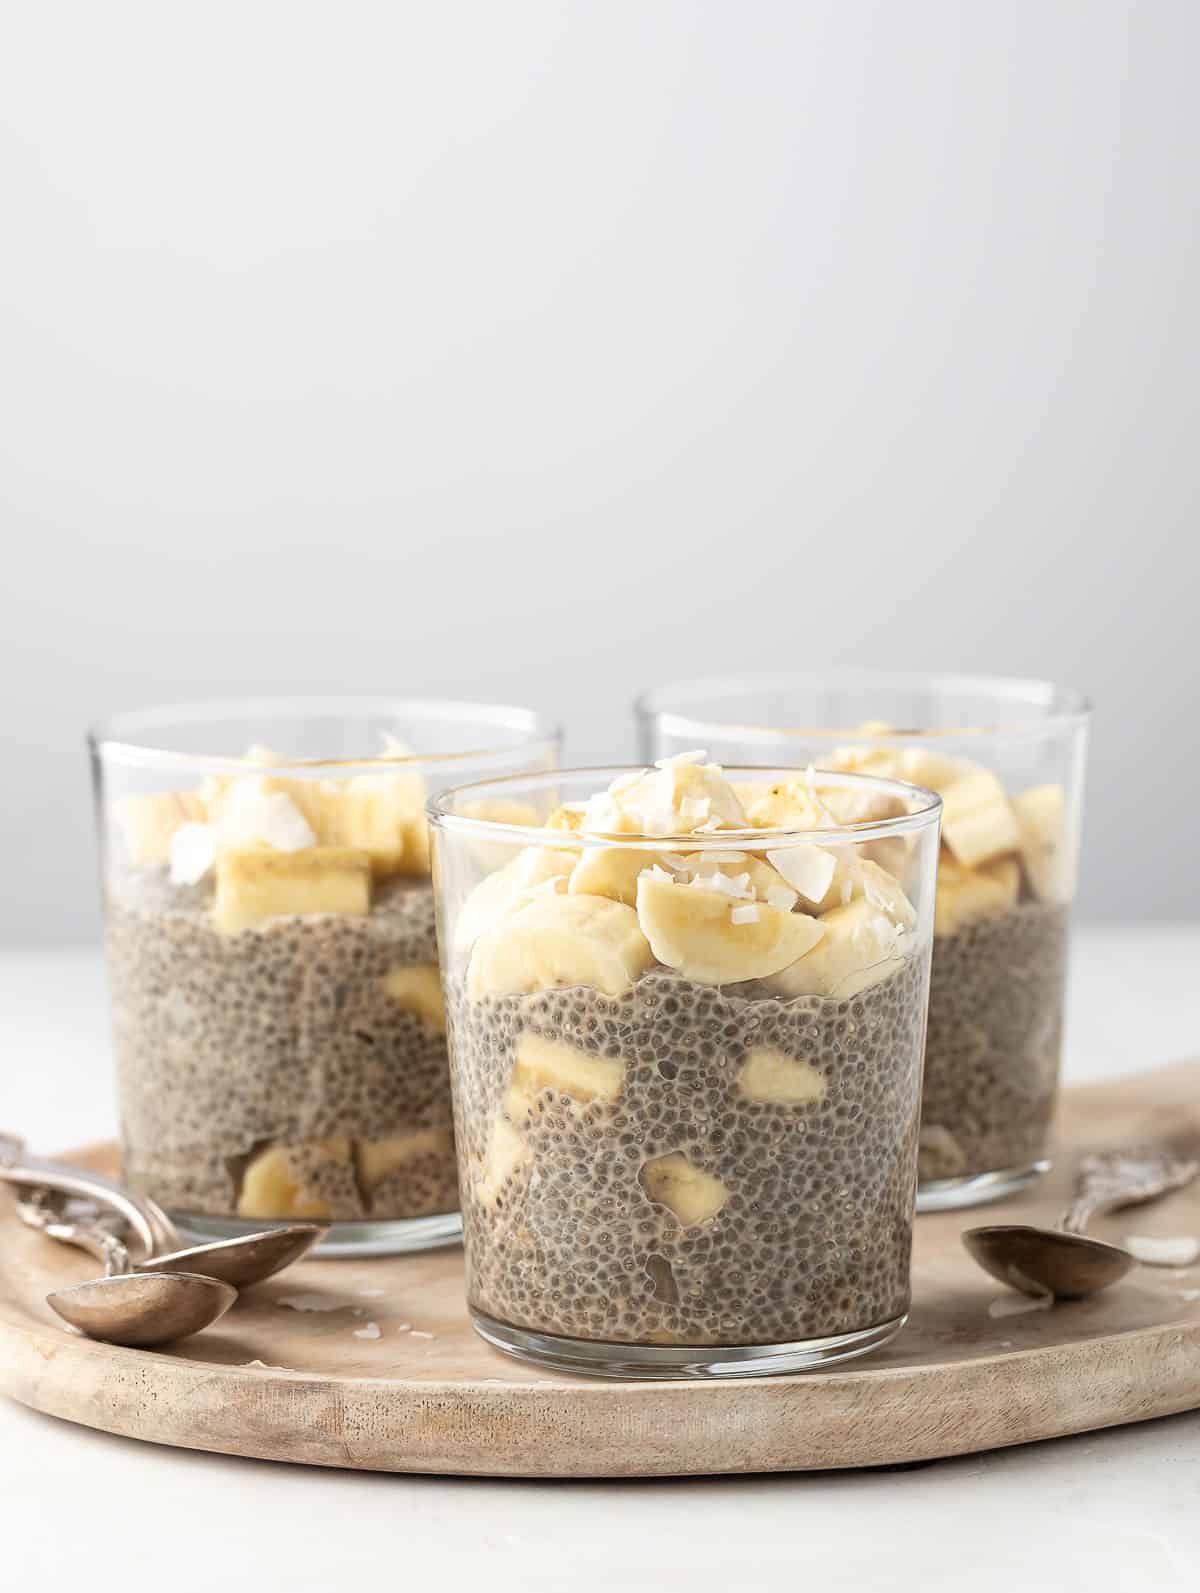 3 cups of banana chia pudding displayed on a wooden bowl